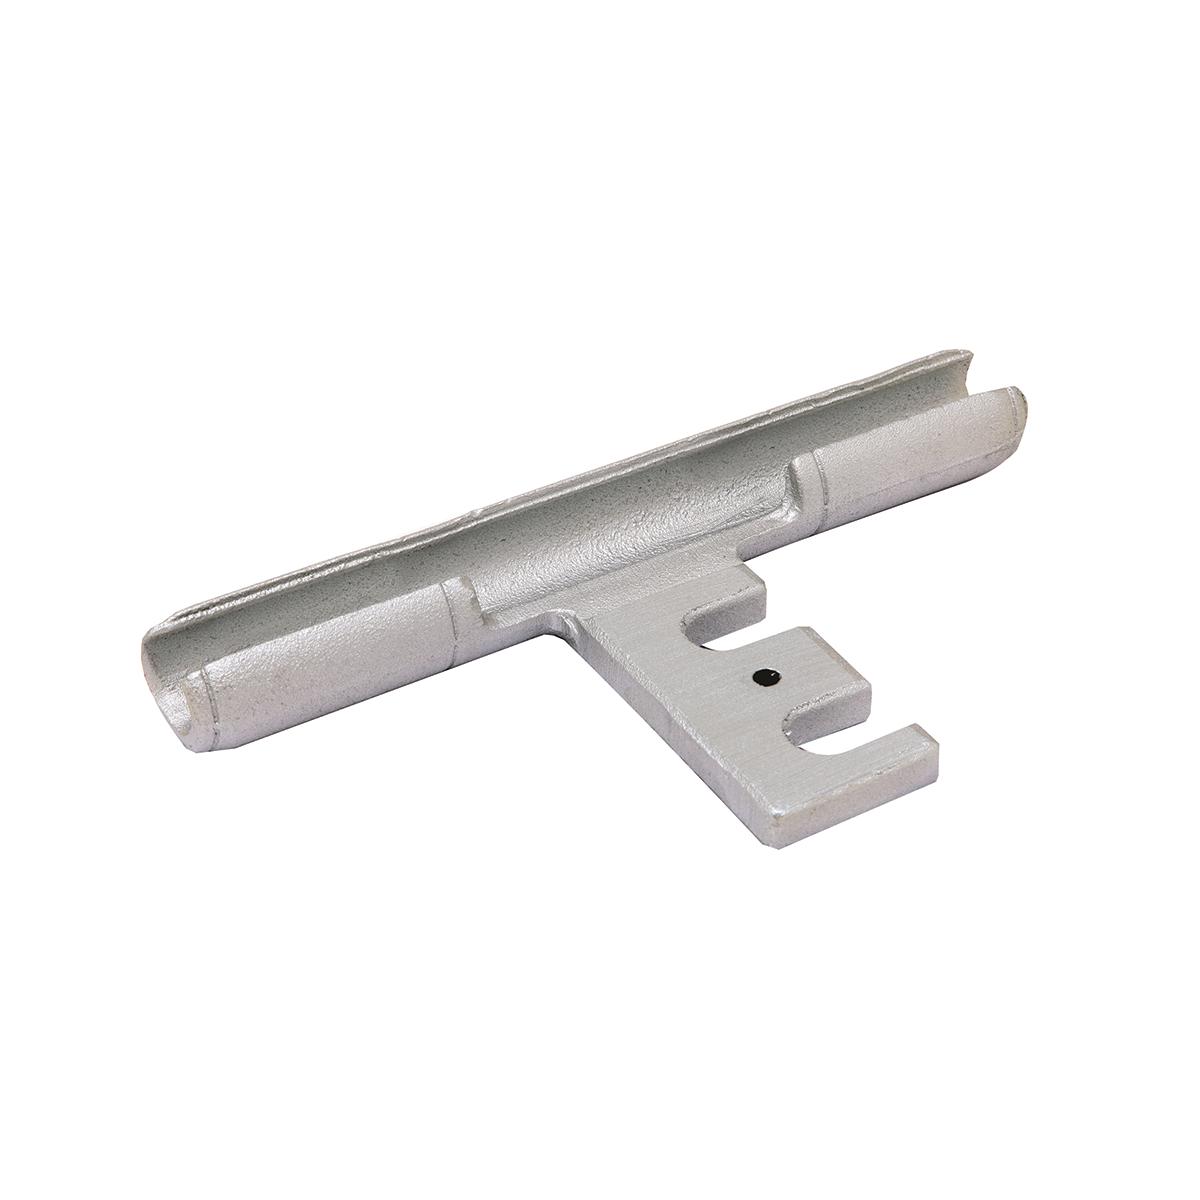 Hubbell YTA39R2N AL primary T-tap connector with slotted tap pad designed for easy disconnecting of tap conductor, For use with Types YKA-R-2N and YKA-A-2N, barrel Length: 5.00 IN L. 